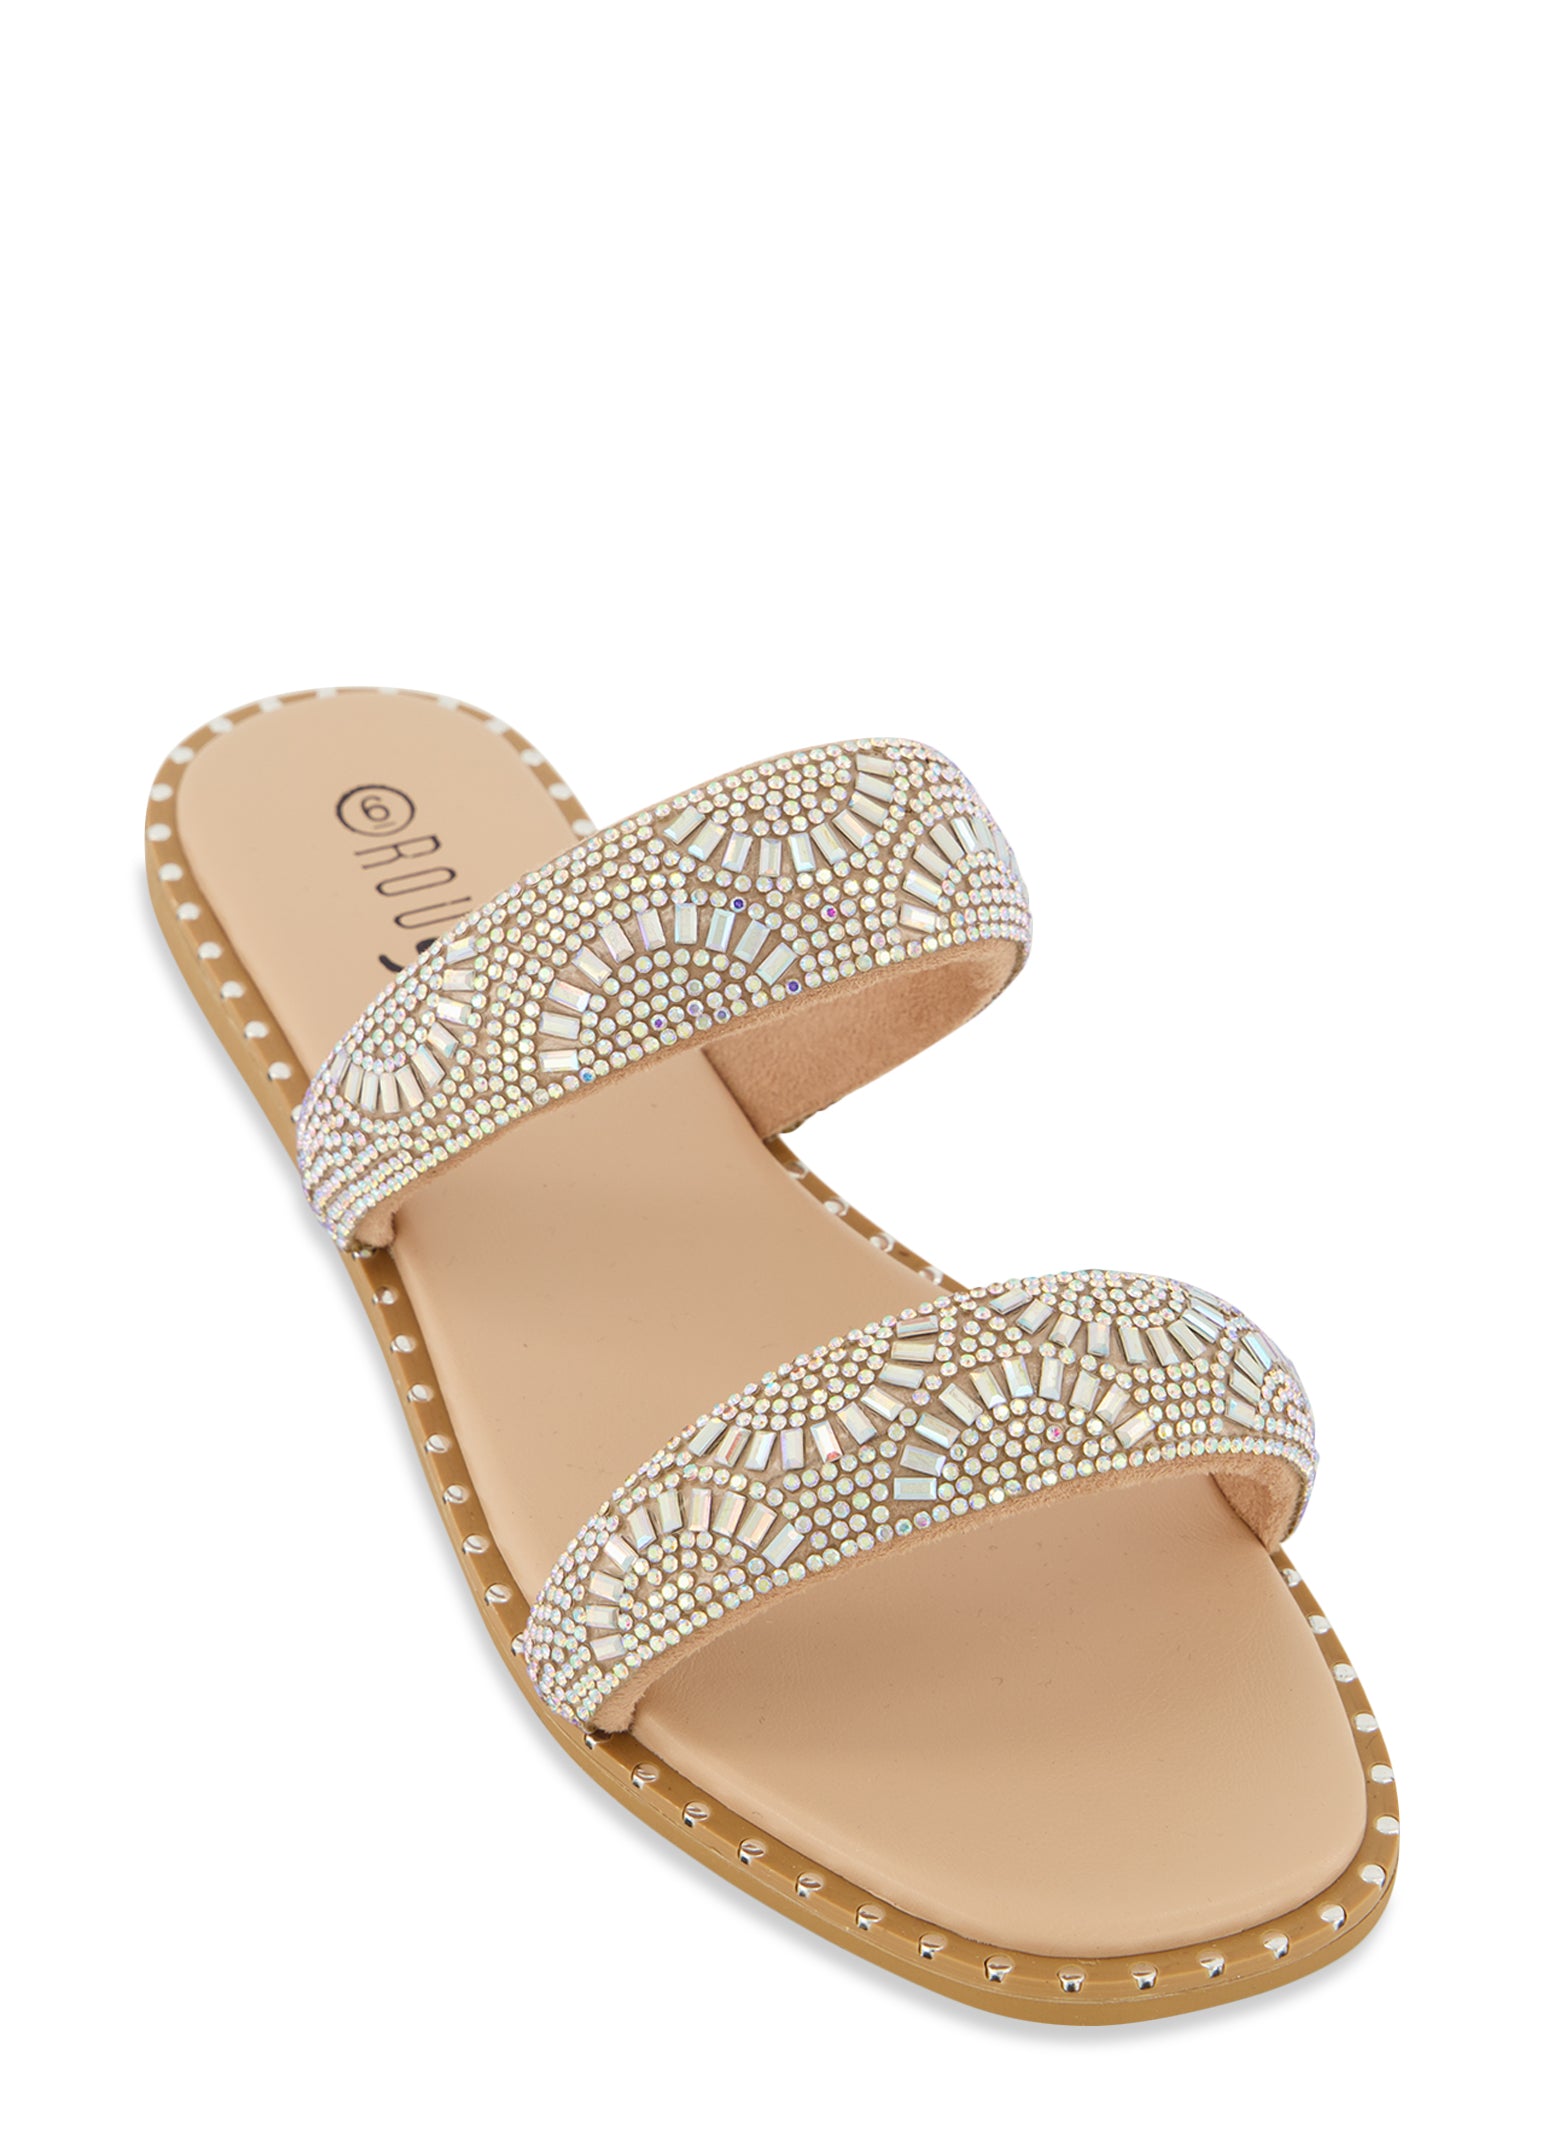 Womens Embellished Double Strap Flat Sandals, Beige, Size 6